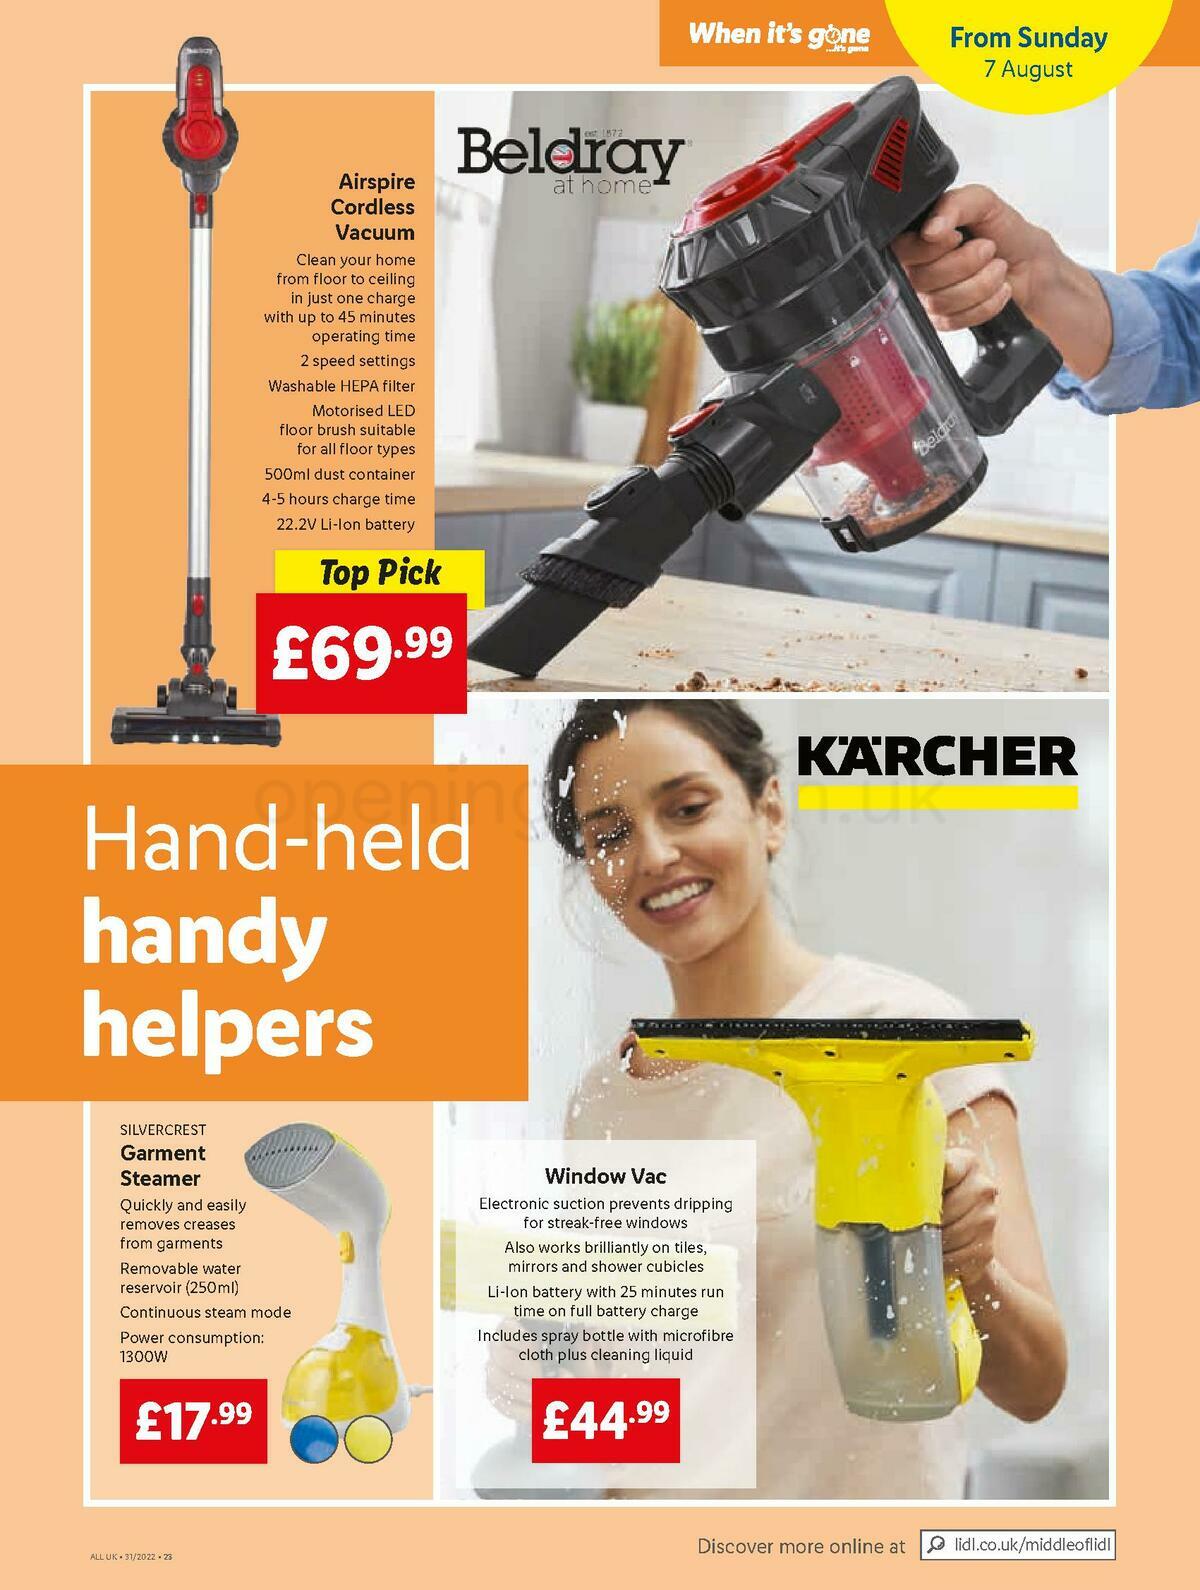 LIDL Offers from 4 August